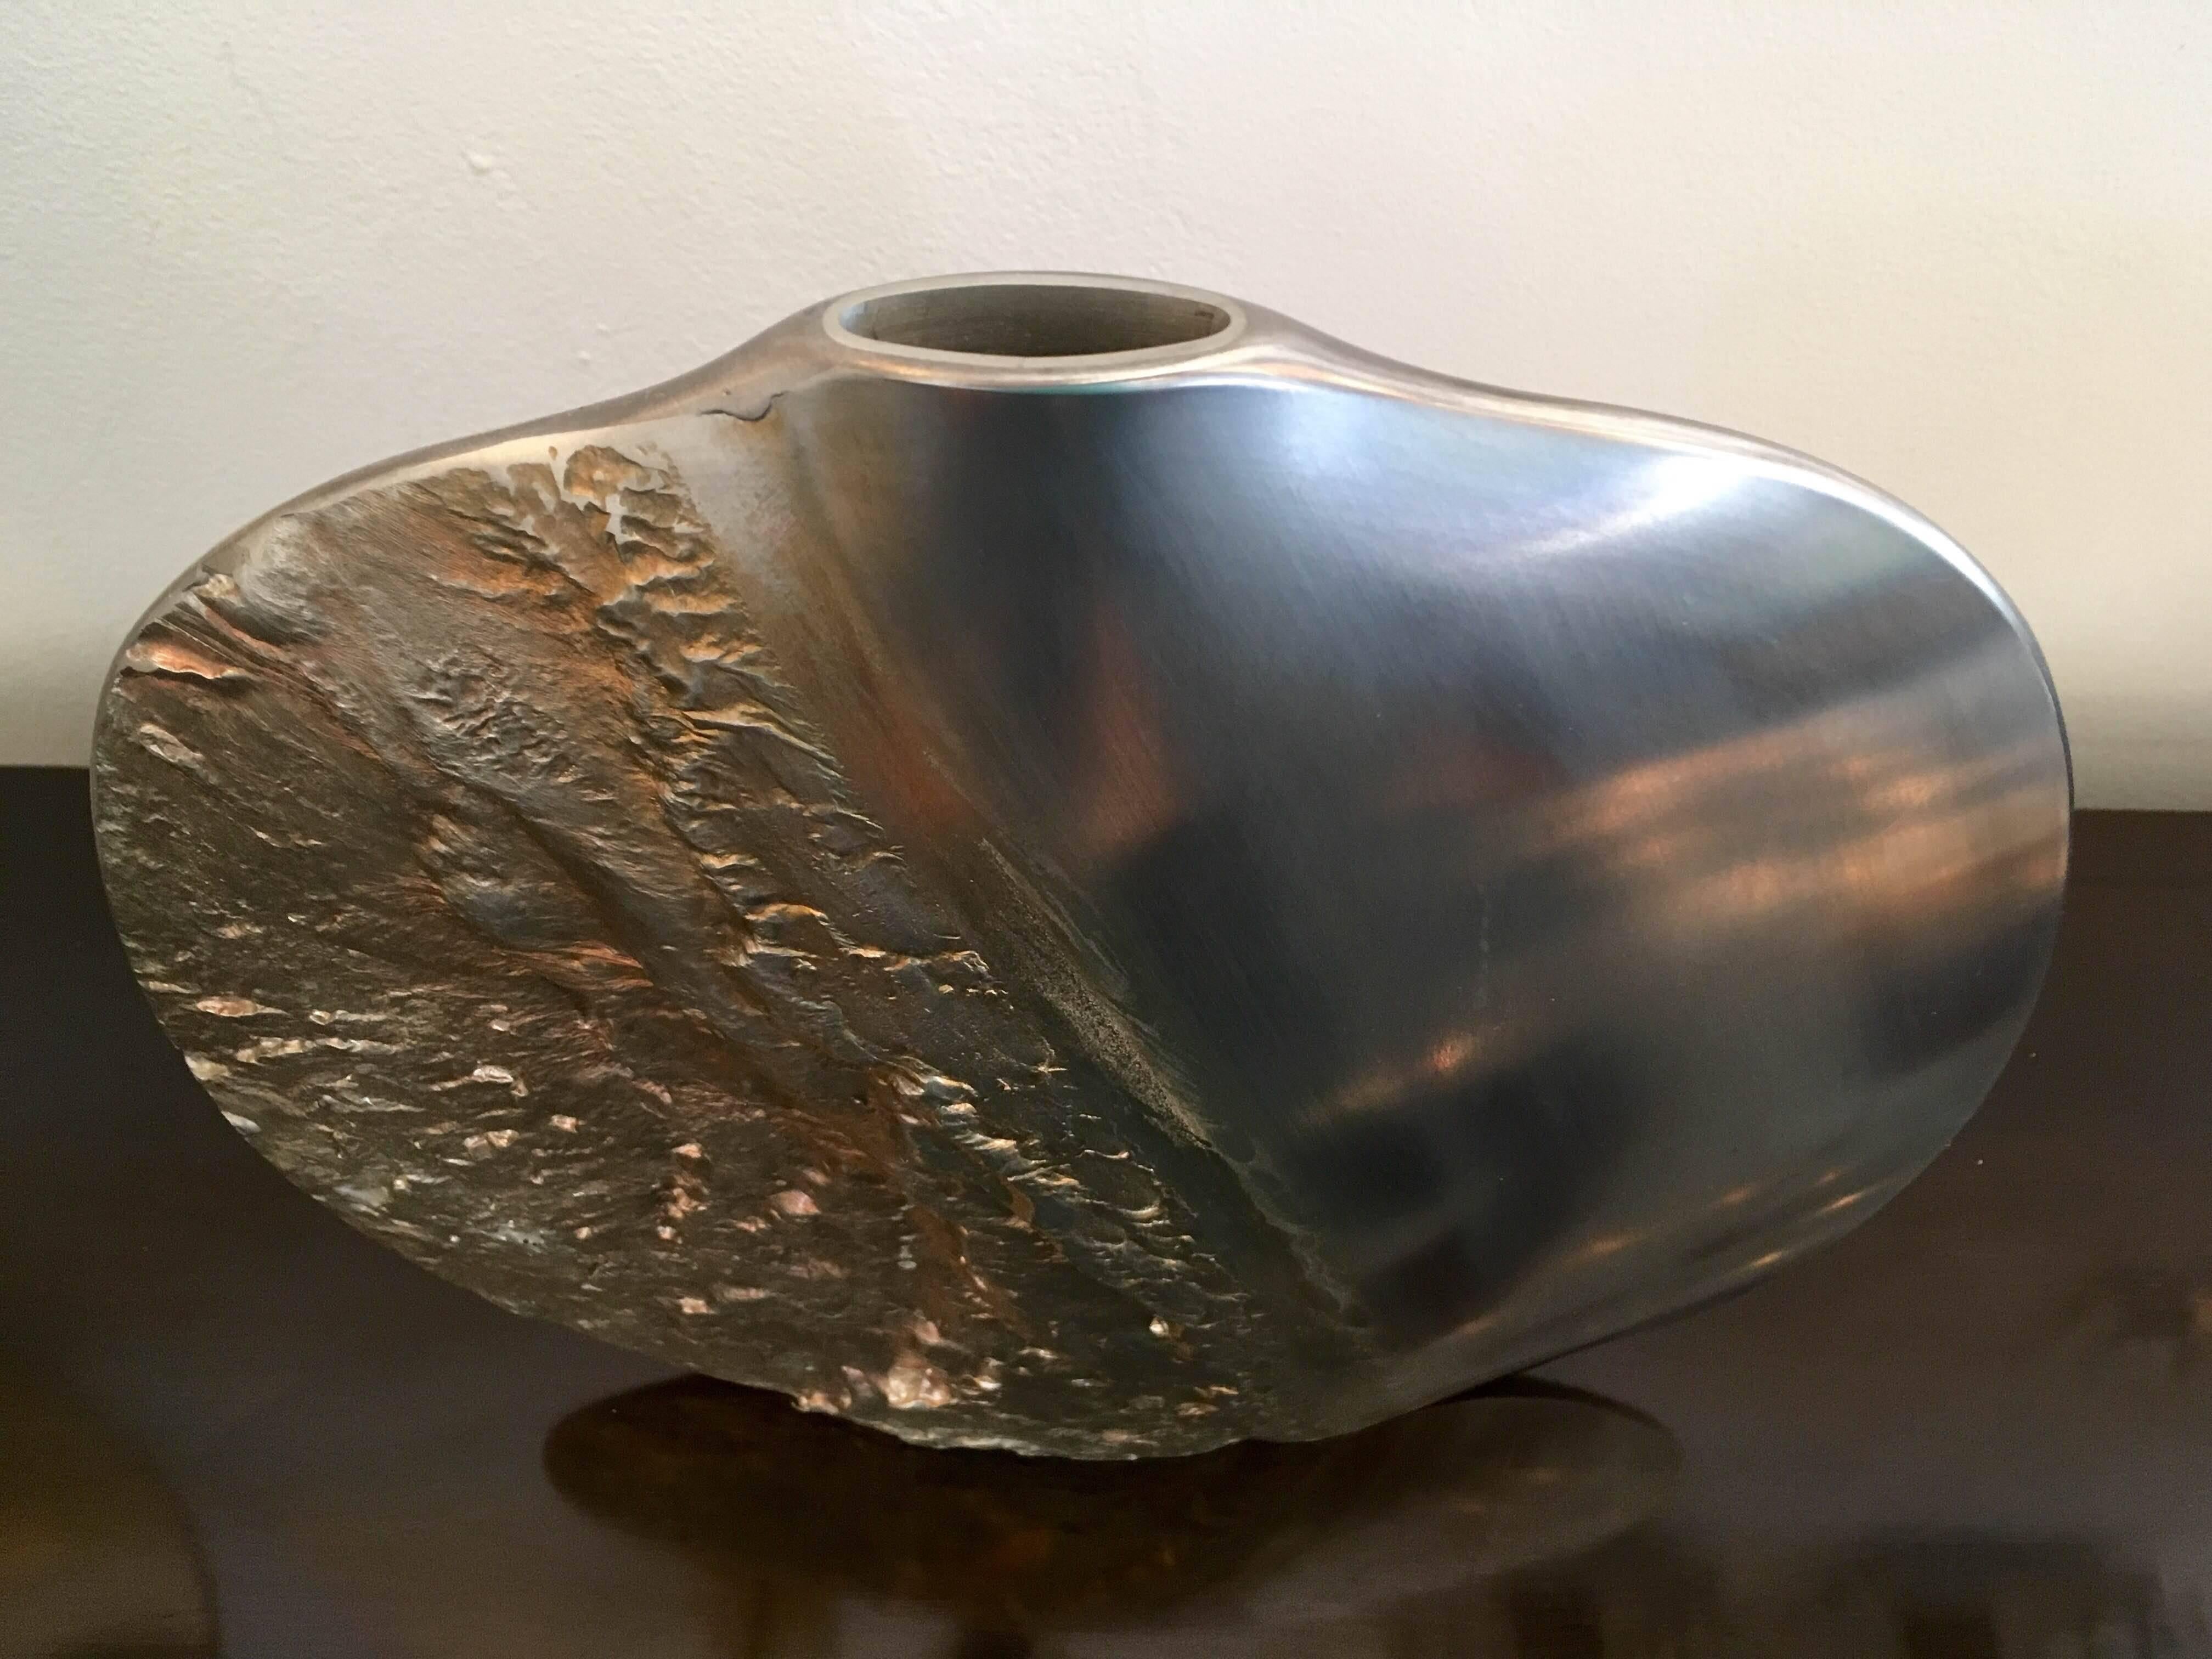 A great signed 1983 sculptural textured pewter vase by Norwegian artist, Helgi Joensen for Illums Bolighus.

Helgi Joensen was raised on the Faroe Islands and the western coast of Norway where he was exposed to the spectacular and ever changing